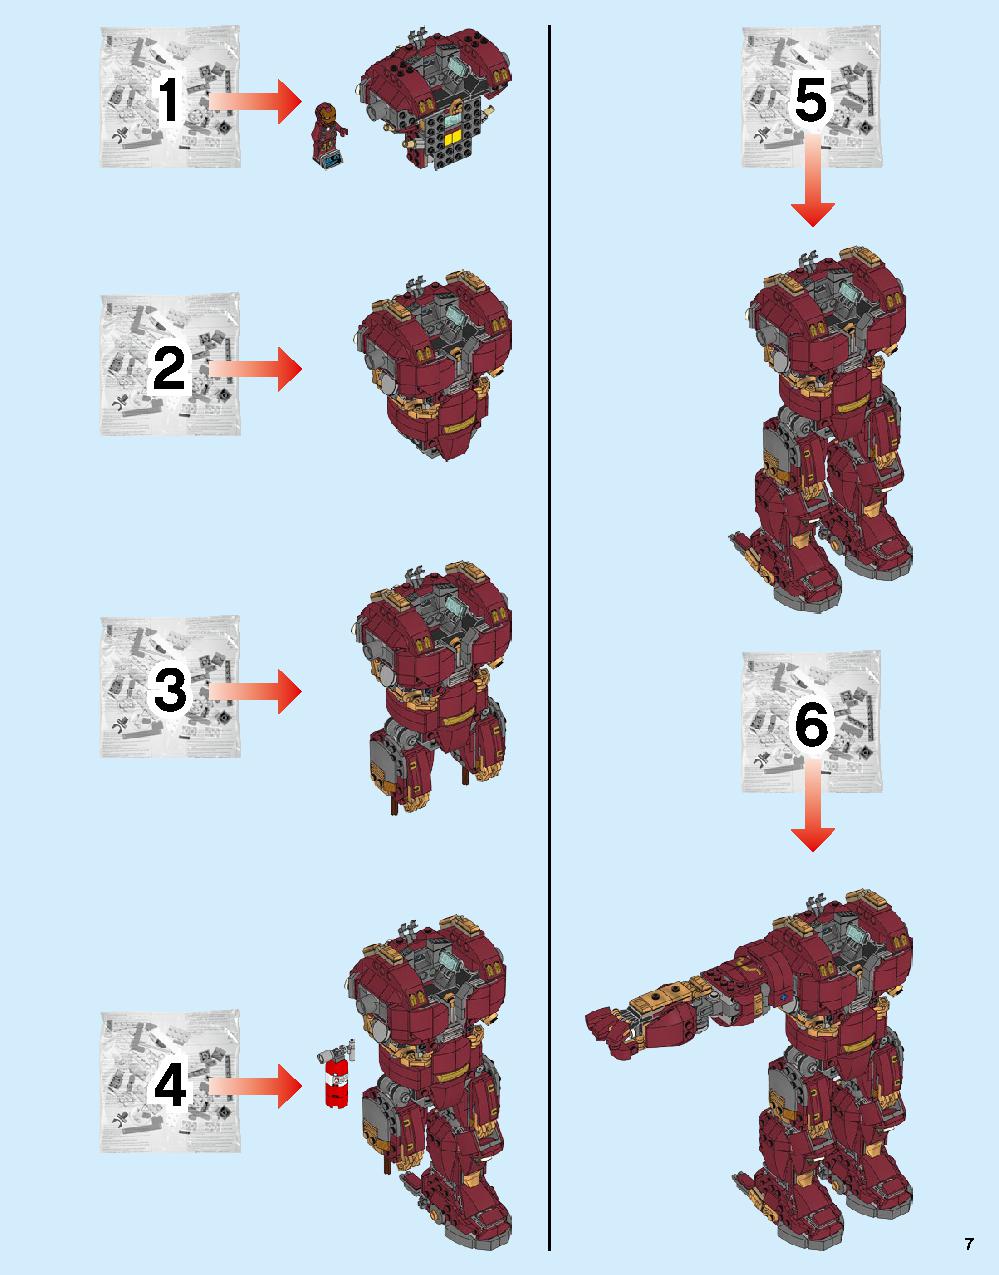 The Hulkbuster: Ultron Edition 76105 LEGO information LEGO instructions 7 page